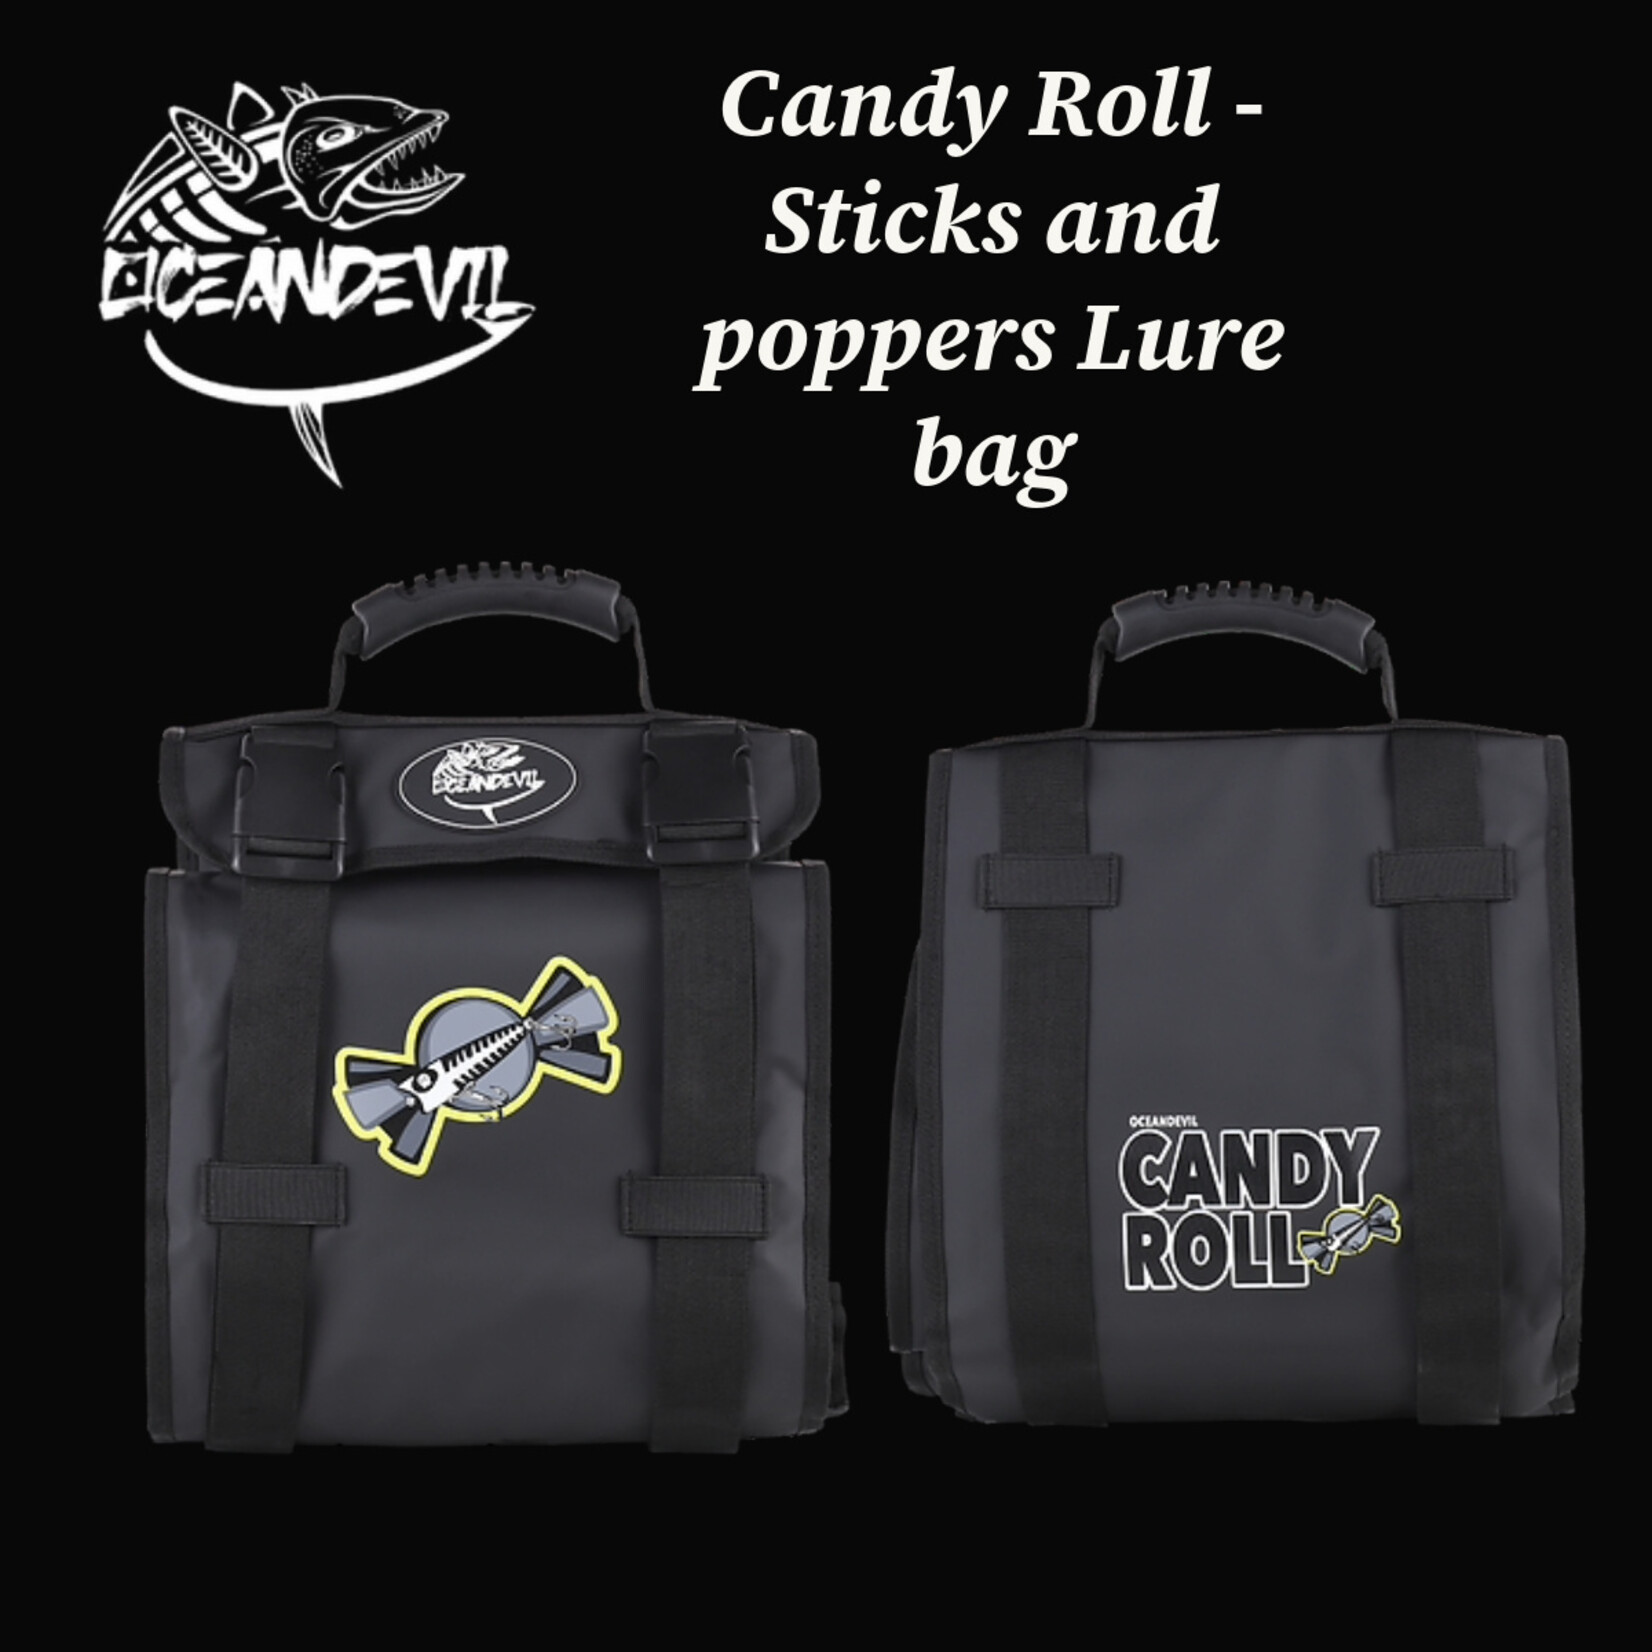 Ocean Devil Candy Roll - Sticks and poppers Lure bag